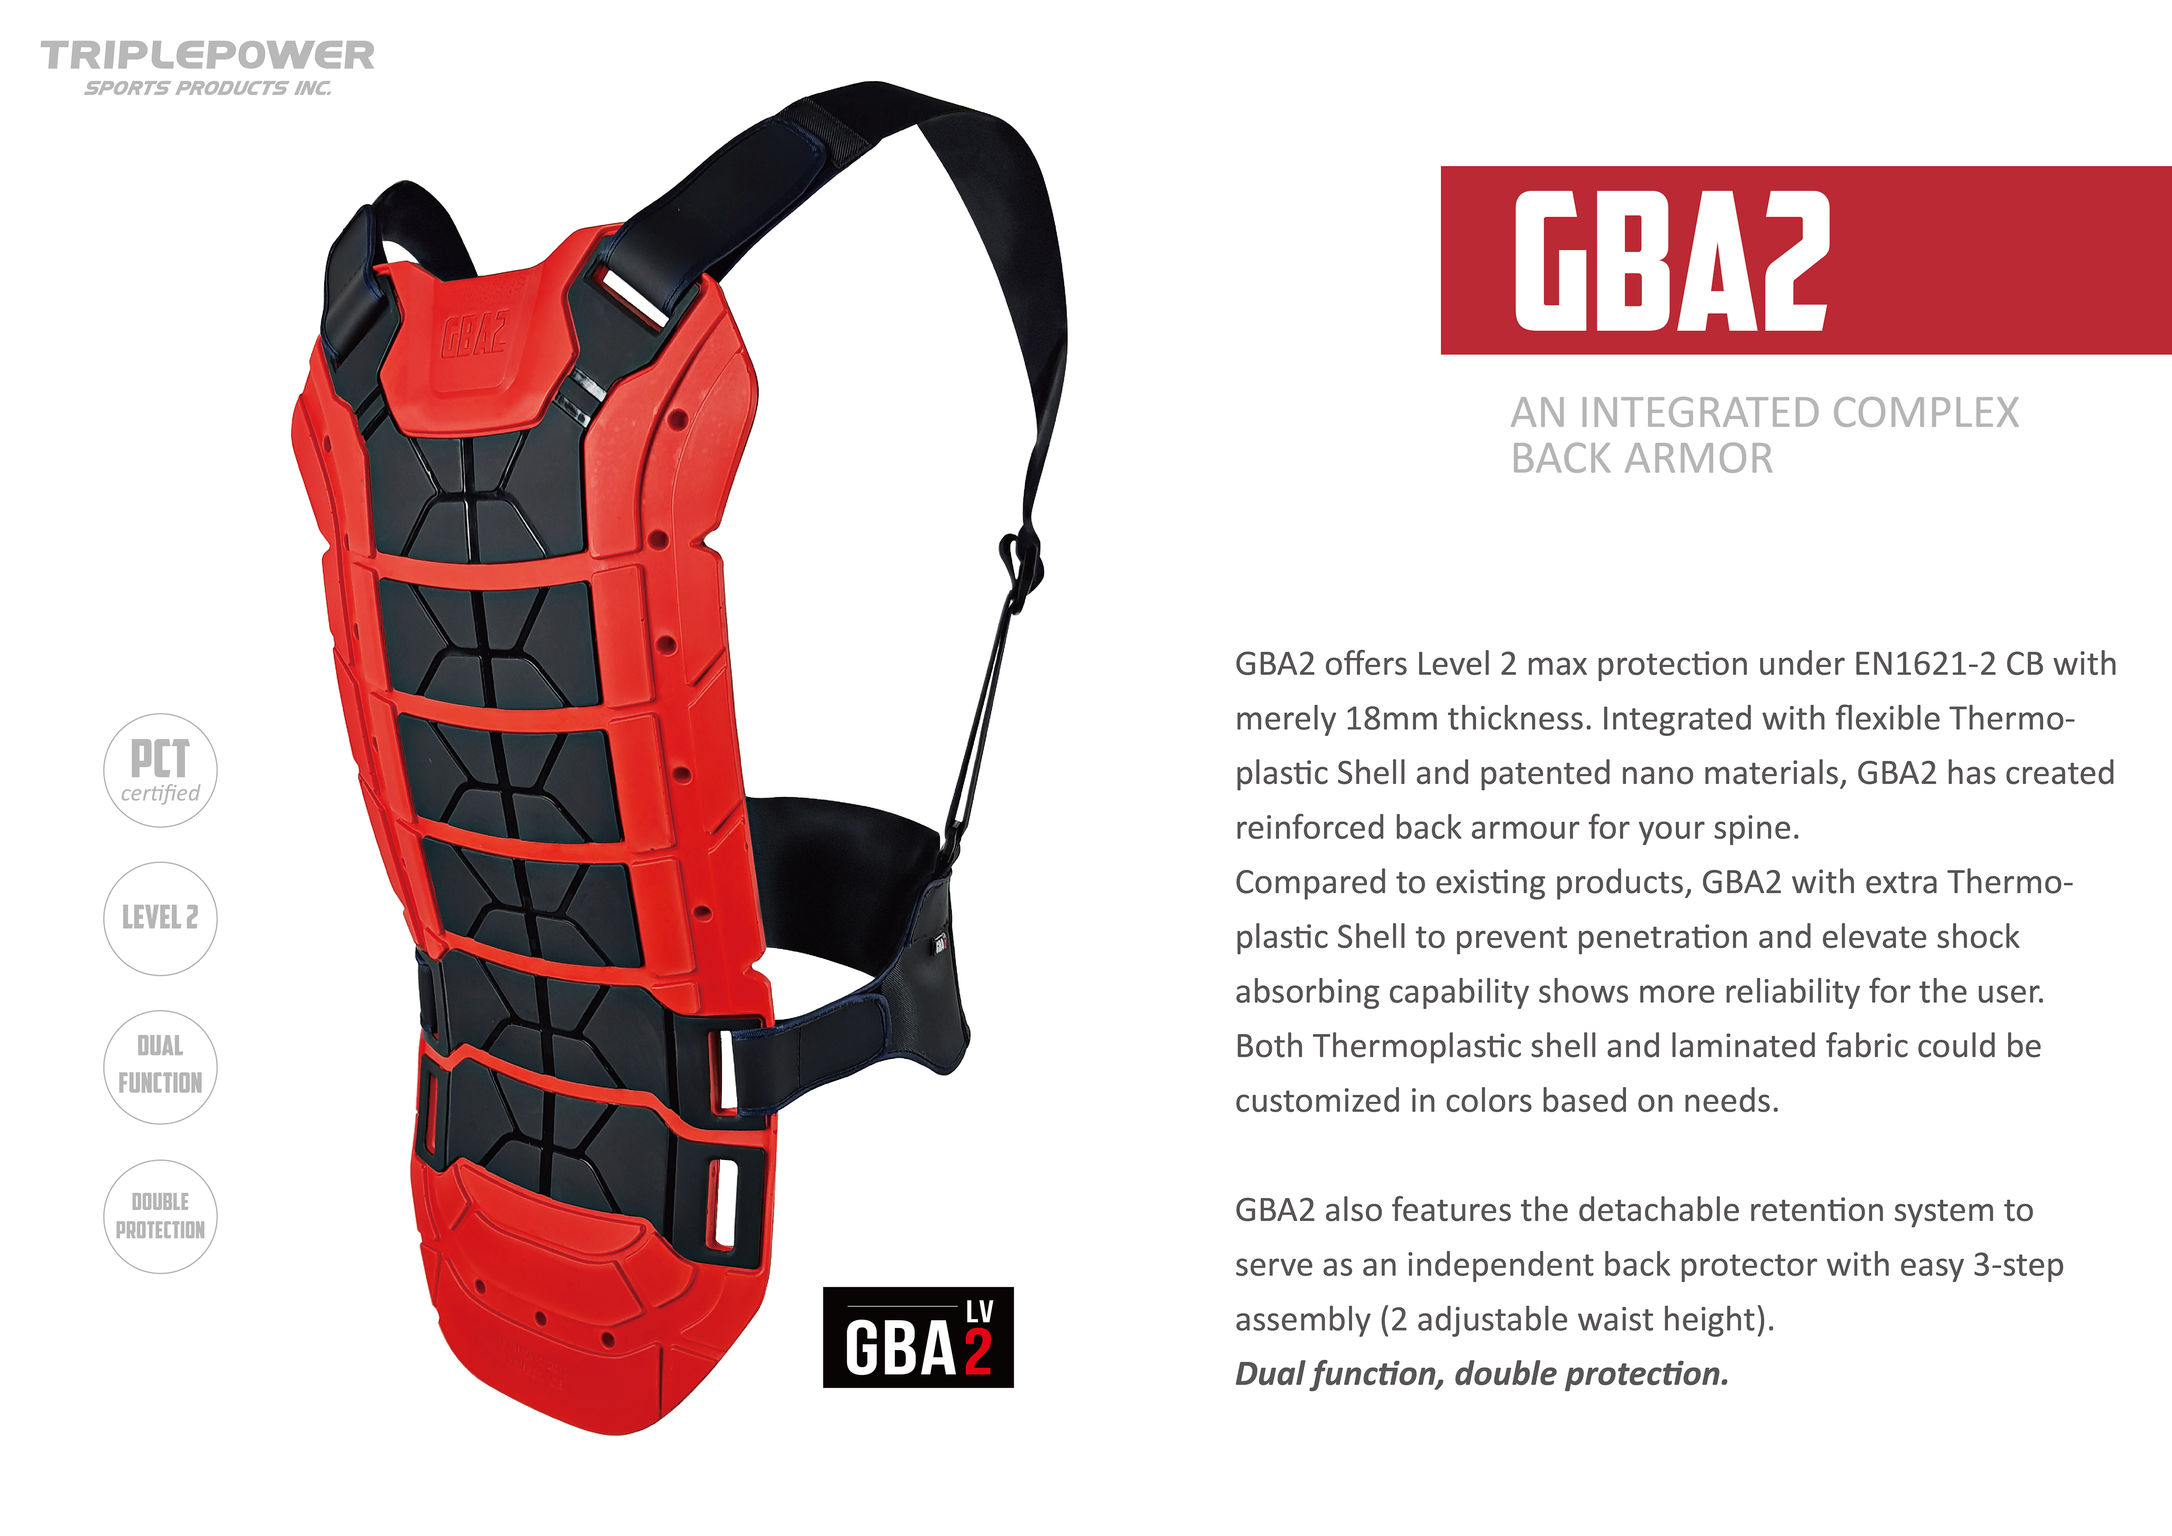 GBA2-AN INTEGRATED COMPLEX BACK ARMOUR